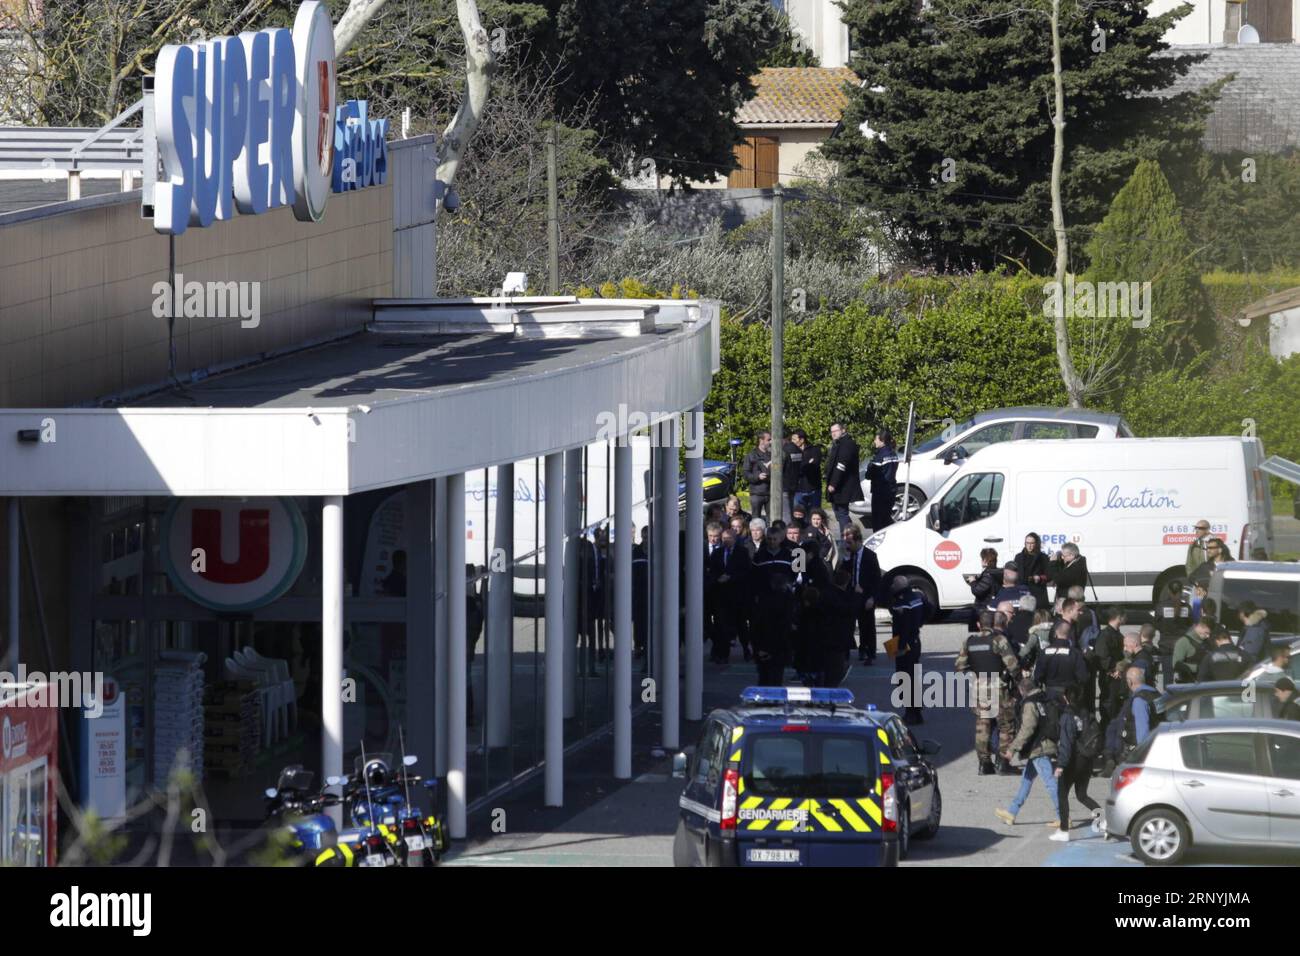 (180323) -- PARIS, March 23, 2018 -- Policemen are seen outside a supermarket in Trebes, southern France, on March 23, 2018. The perpetrator of the hostage-taking incident was shot dead in the police raid, according to French Interior Minister Gerard Collomb. He held several hostages early on Friday, causing two persons dead and an officer wounded. ) (lb) FRANCE-TREBES-HOSTAGE-TAKING-DEATH TOLL JosexSantos PUBLICATIONxNOTxINxCHN Stock Photo